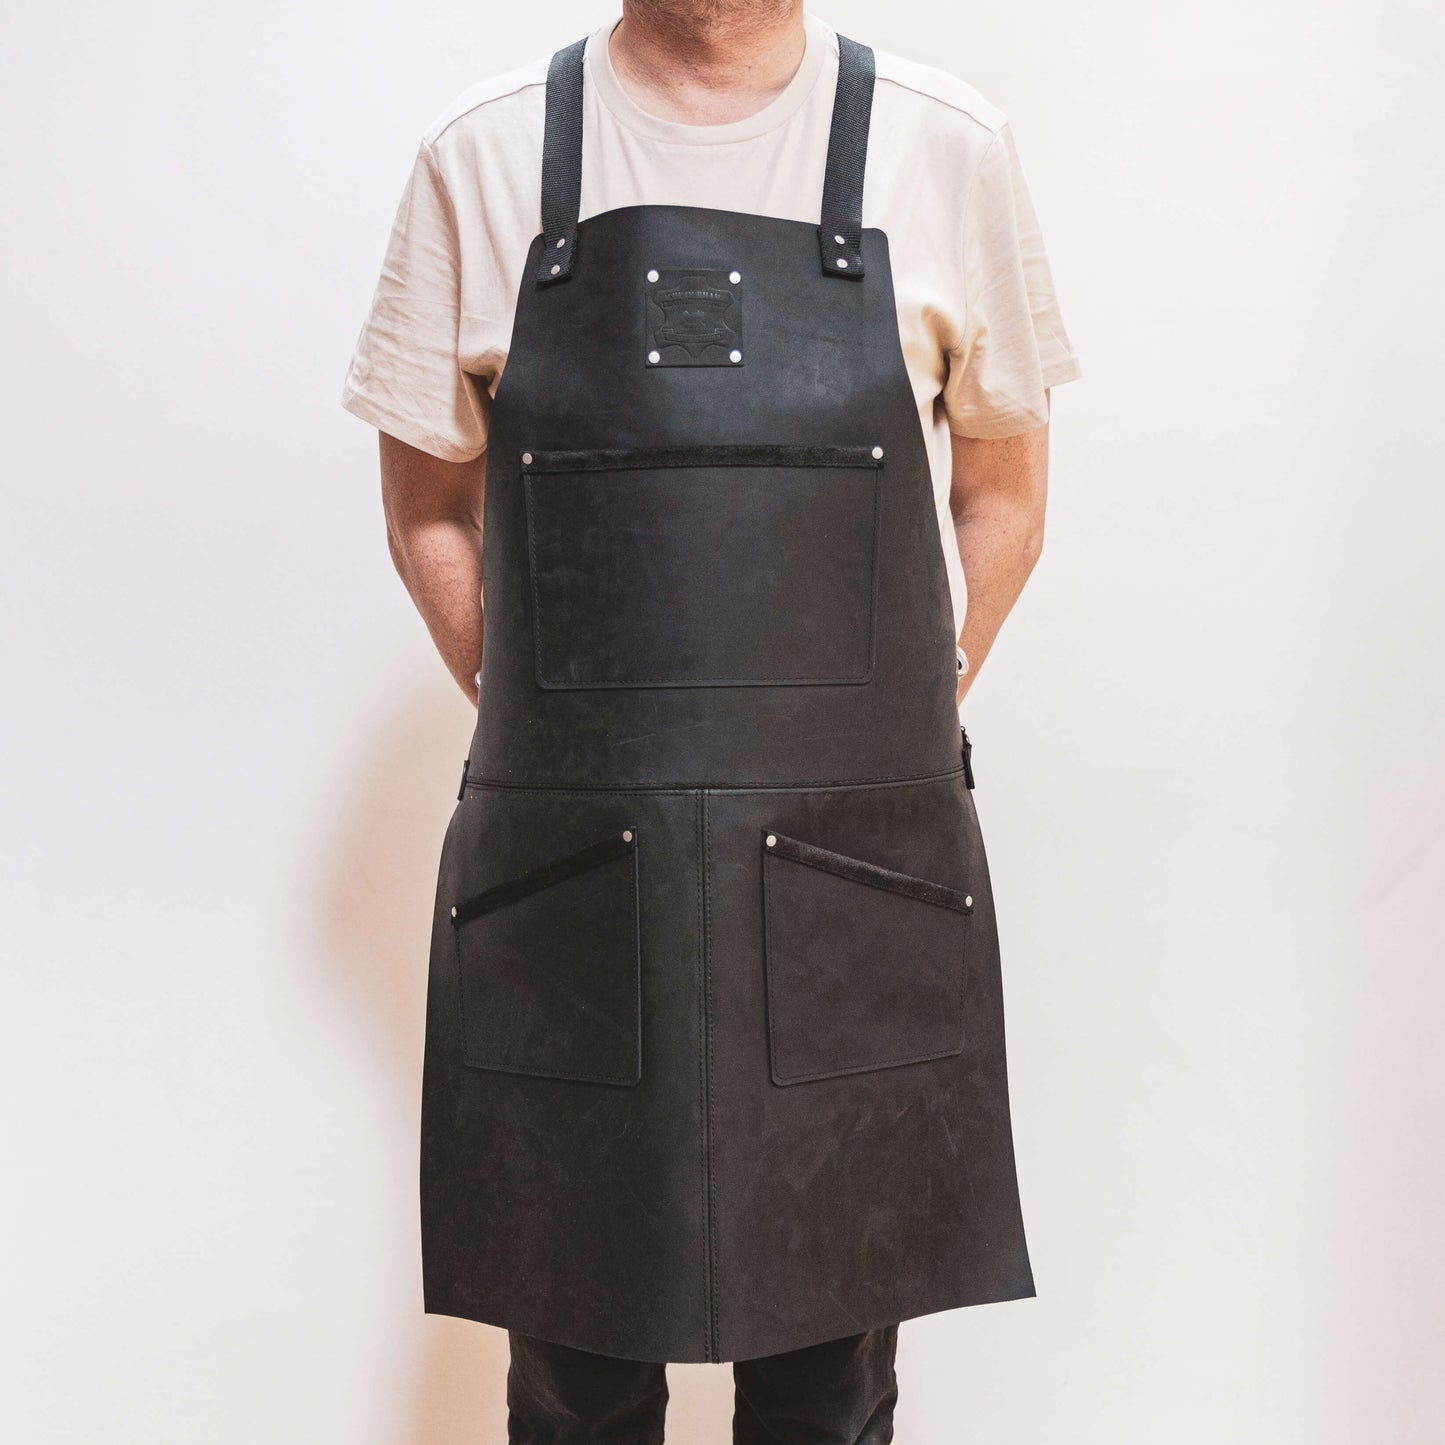 A carpenter wearing a white t-shirt and The Durham Leatherworker dark leather apron stands against a light background, with the apron featuring pockets and metallic clasps.